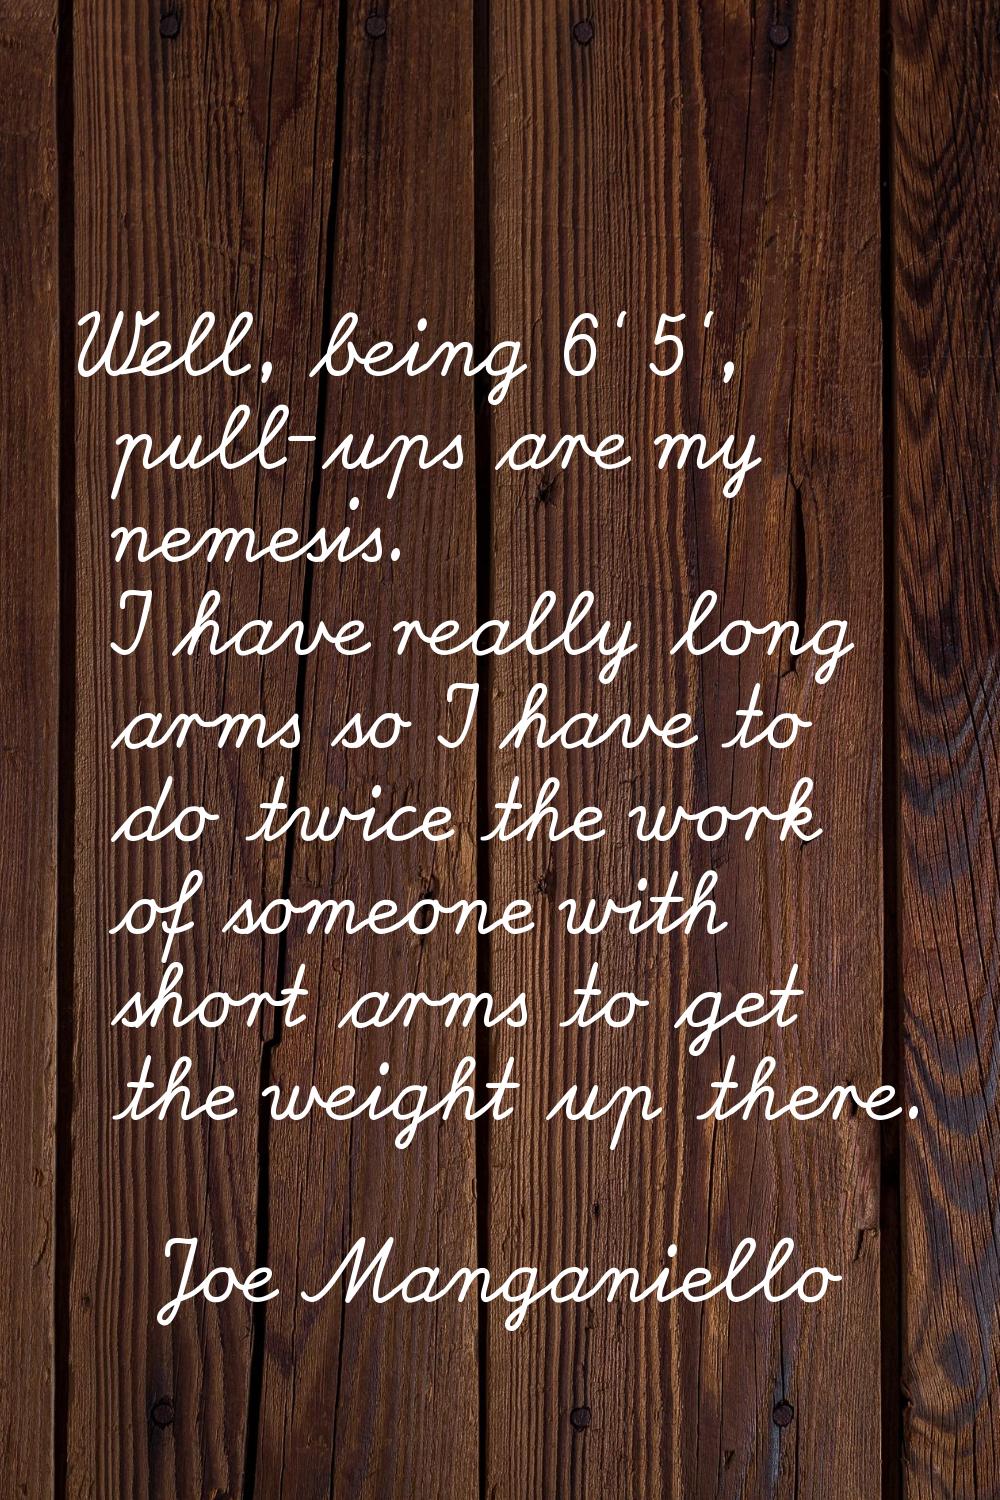 Well, being 6' 5', pull-ups are my nemesis. I have really long arms so I have to do twice the work 